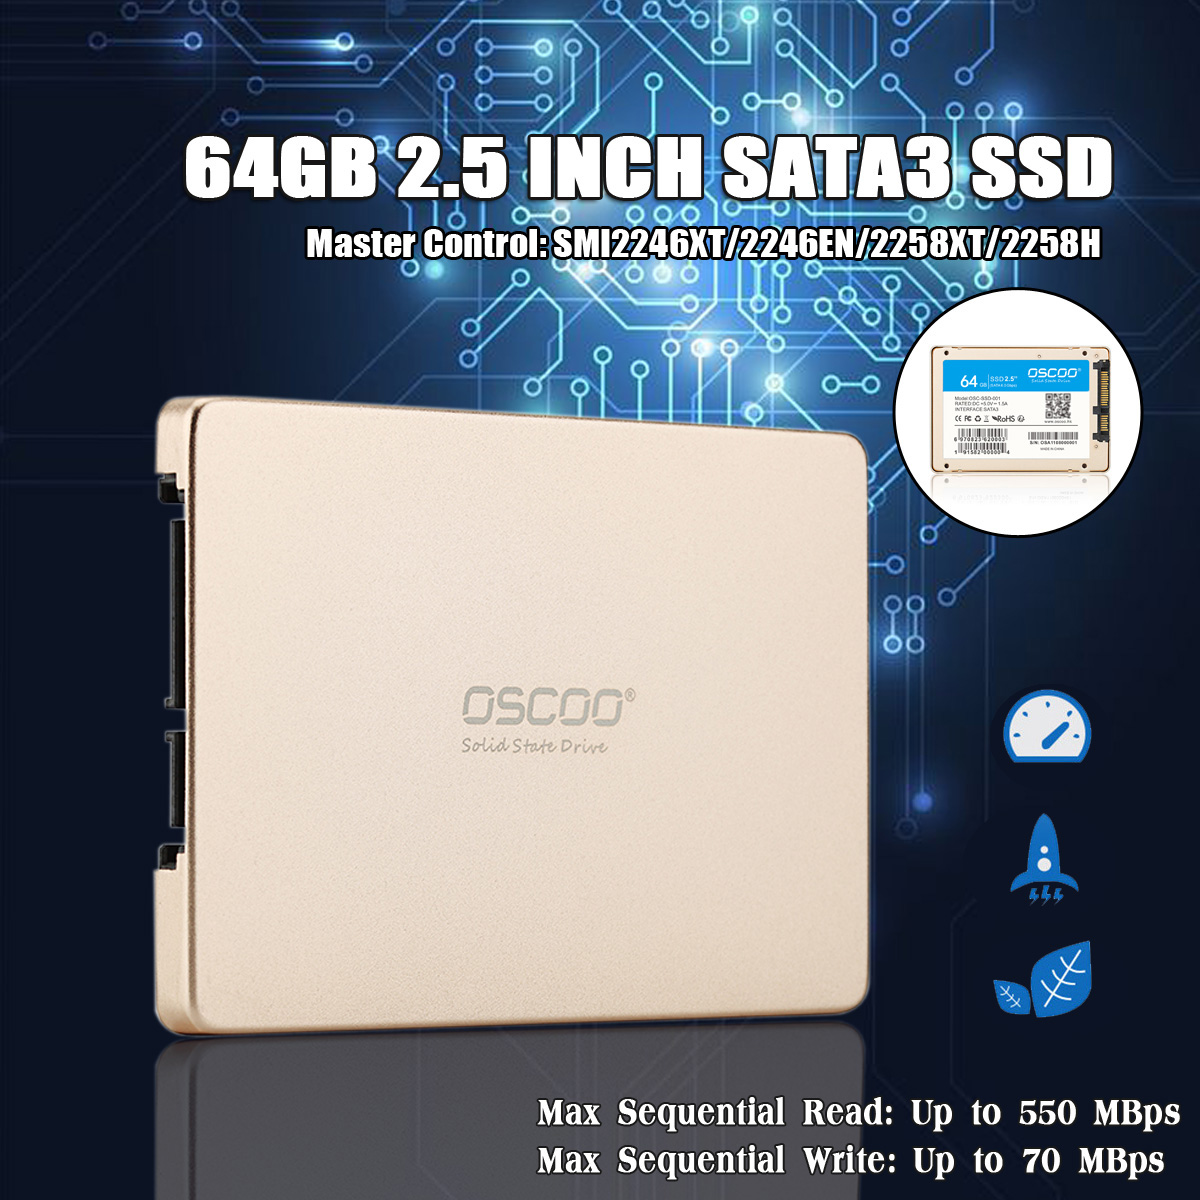 OSCOO-64GB-25-inch-SATA3-SSD-Solid-State-Drive-Aluminium-alloy-Internal-Hard-Disk-Support-TRIM-1296343-1